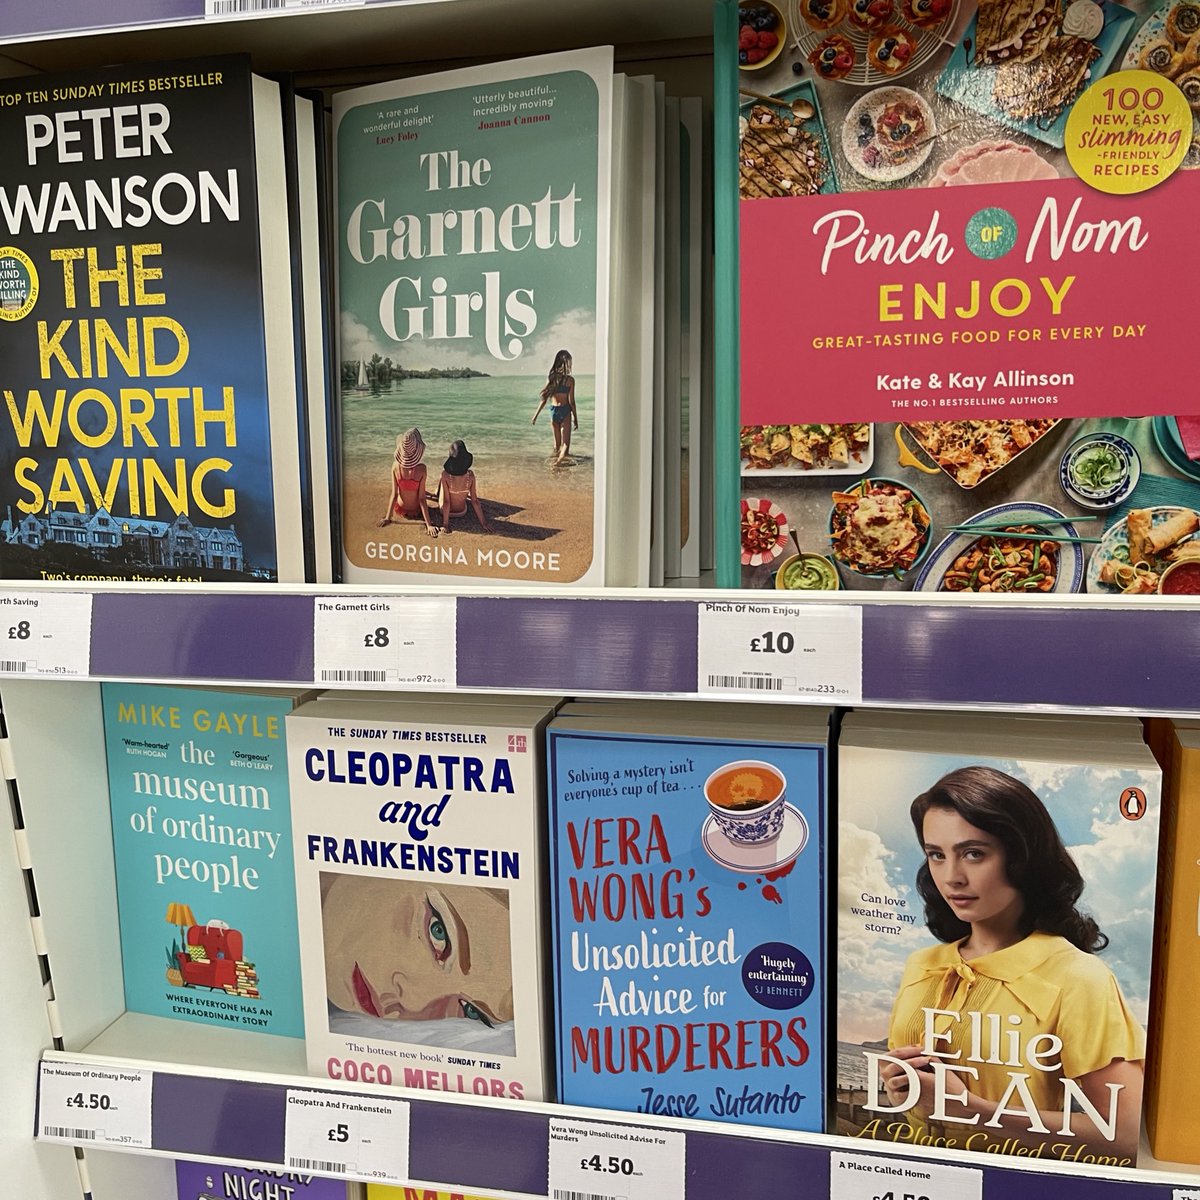 First spot of #VeraWong in big Sainsbury’s, and in great company too below #TheGarnettGirls! 😍💙